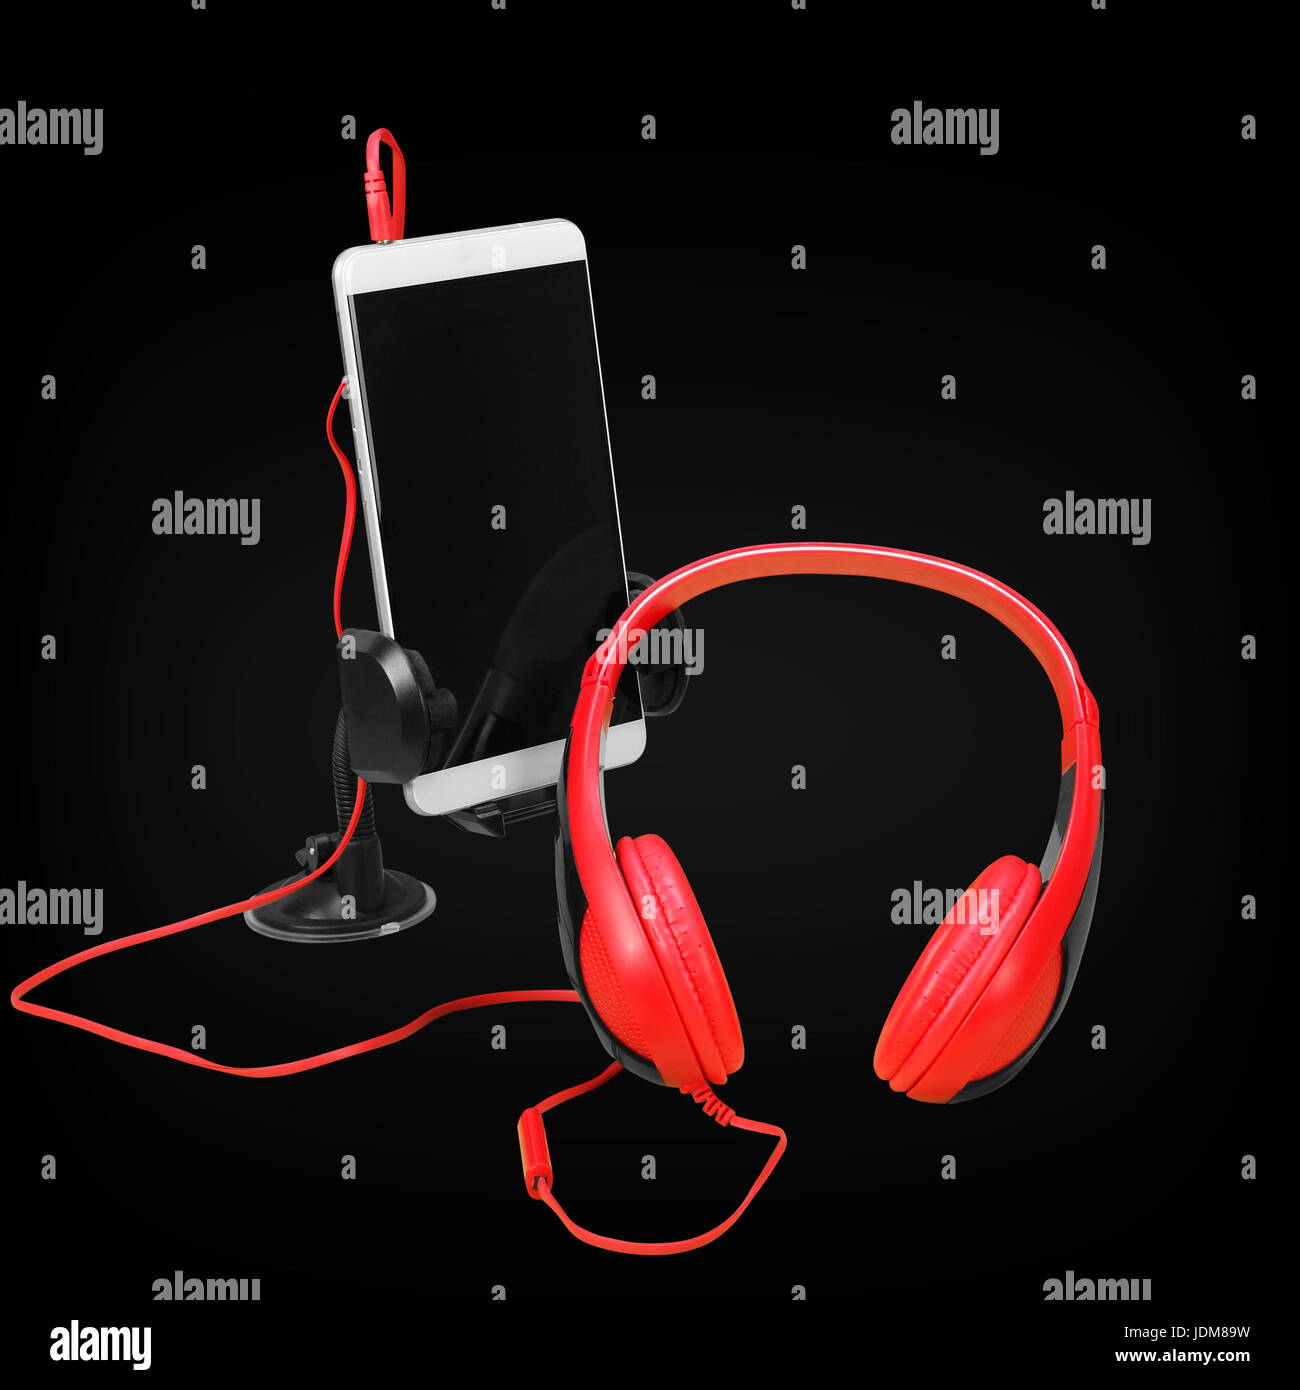 Musical equipment - Red headphone and smartphone on a black background. Stock Photo